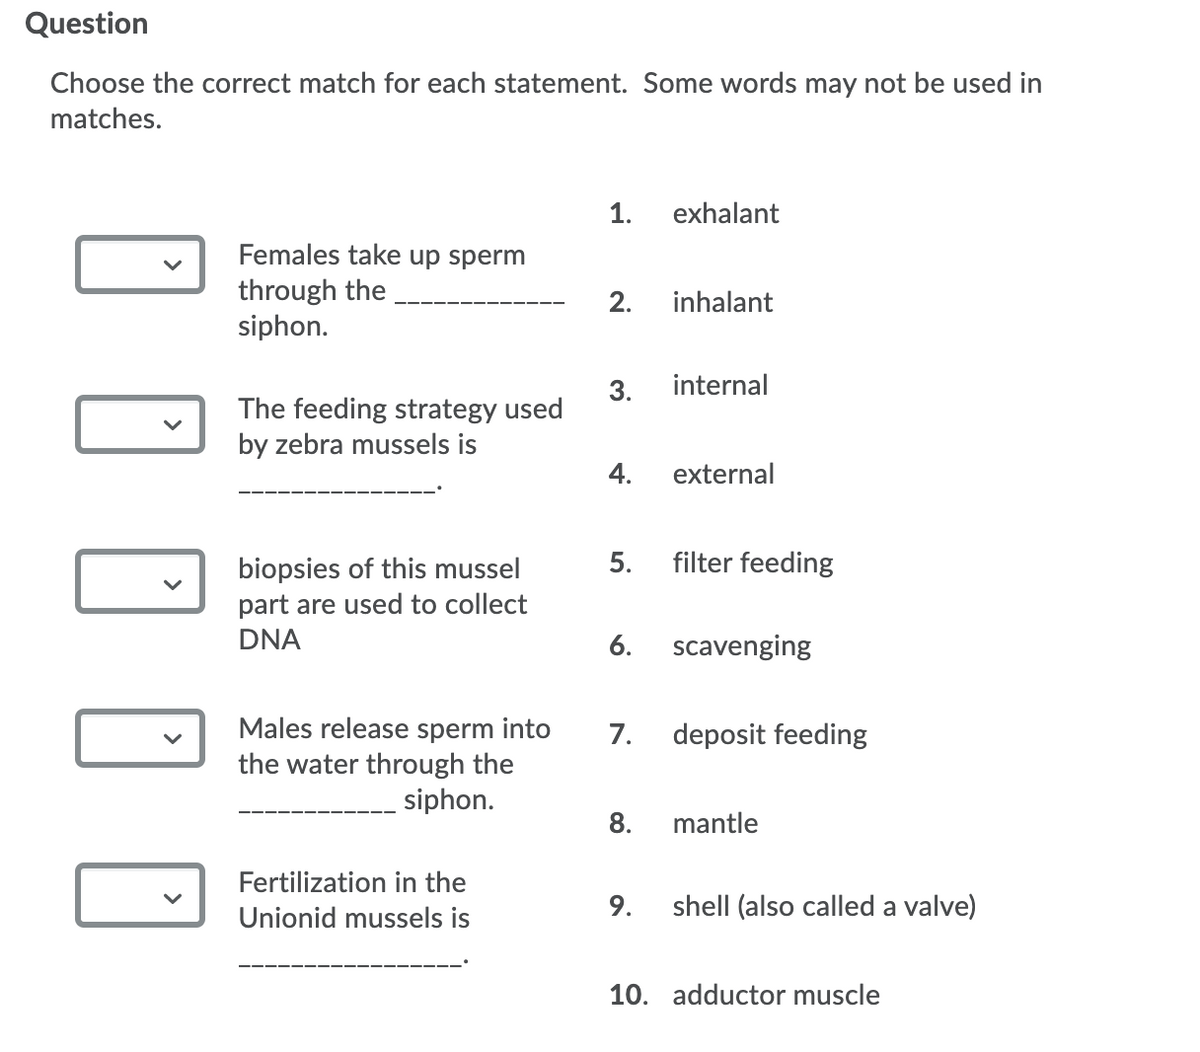 Question
Choose the correct match for each statement. Some words may not be used in
matches.
1.
exhalant
Females take up sperm
through the
siphon.
2.
inhalant
3.
internal
The feeding strategy used
by zebra mussels is
4.
external
5.
filter feeding
biopsies of this mussel
part are used to collect
DNA
6.
scavenging
Males release sperm into
the water through the
siphon.
7.
deposit feeding
8.
mantle
Fertilization in the
Unionid mussels is
9.
shell (also called a valve)
10. adductor muscle
